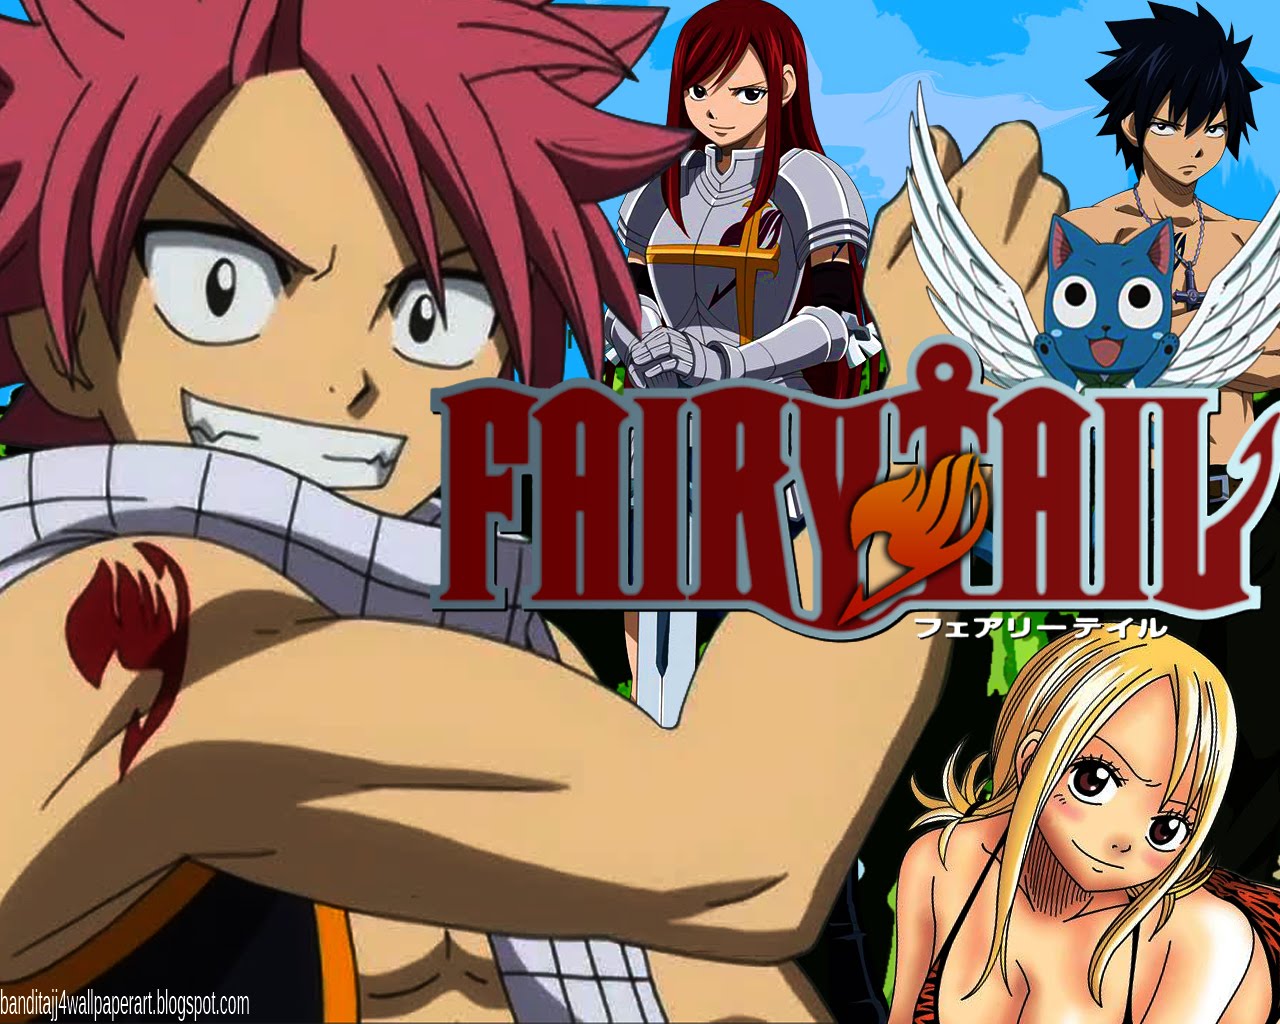  wallpapers place for the best top desktop fairy tail wallpapers in all